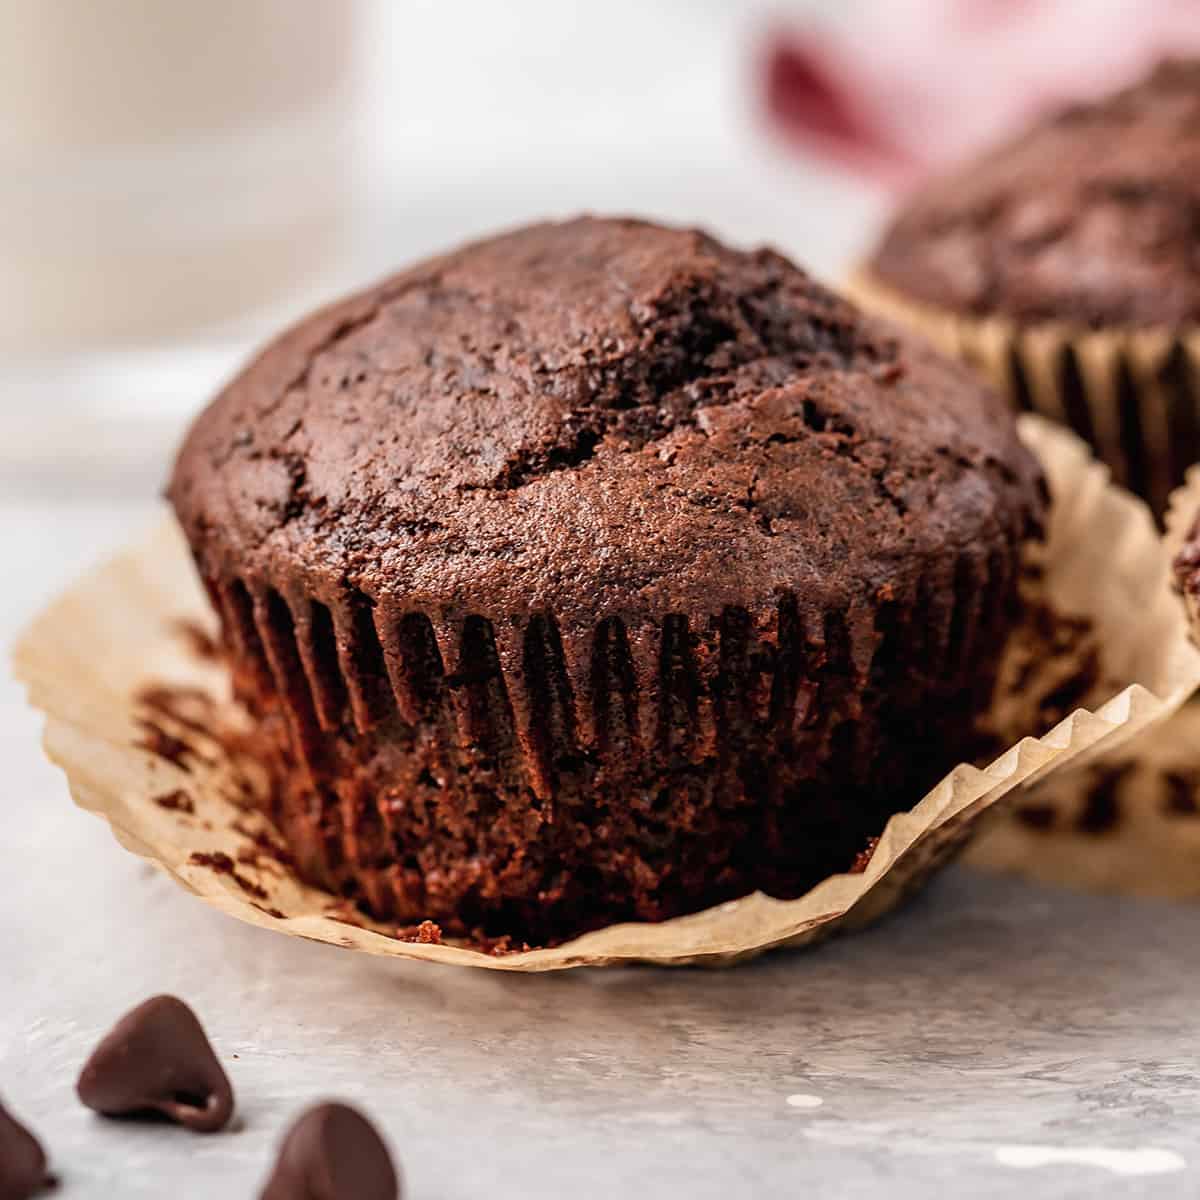 a Chocolate Muffin with the wrapper peeled off